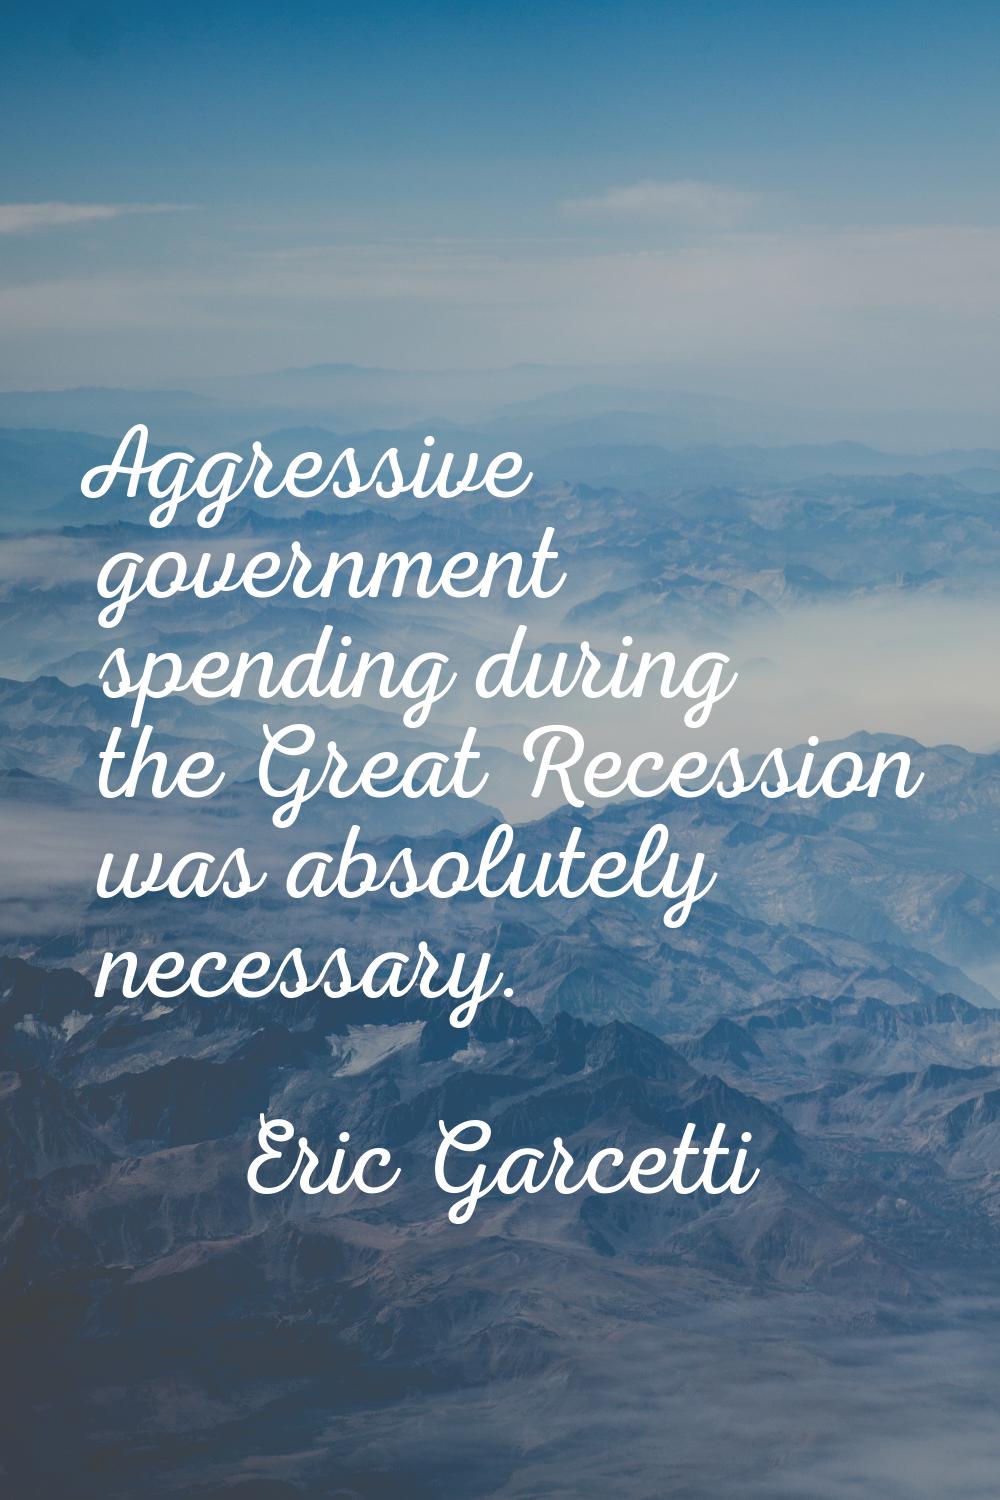 Aggressive government spending during the Great Recession was absolutely necessary.